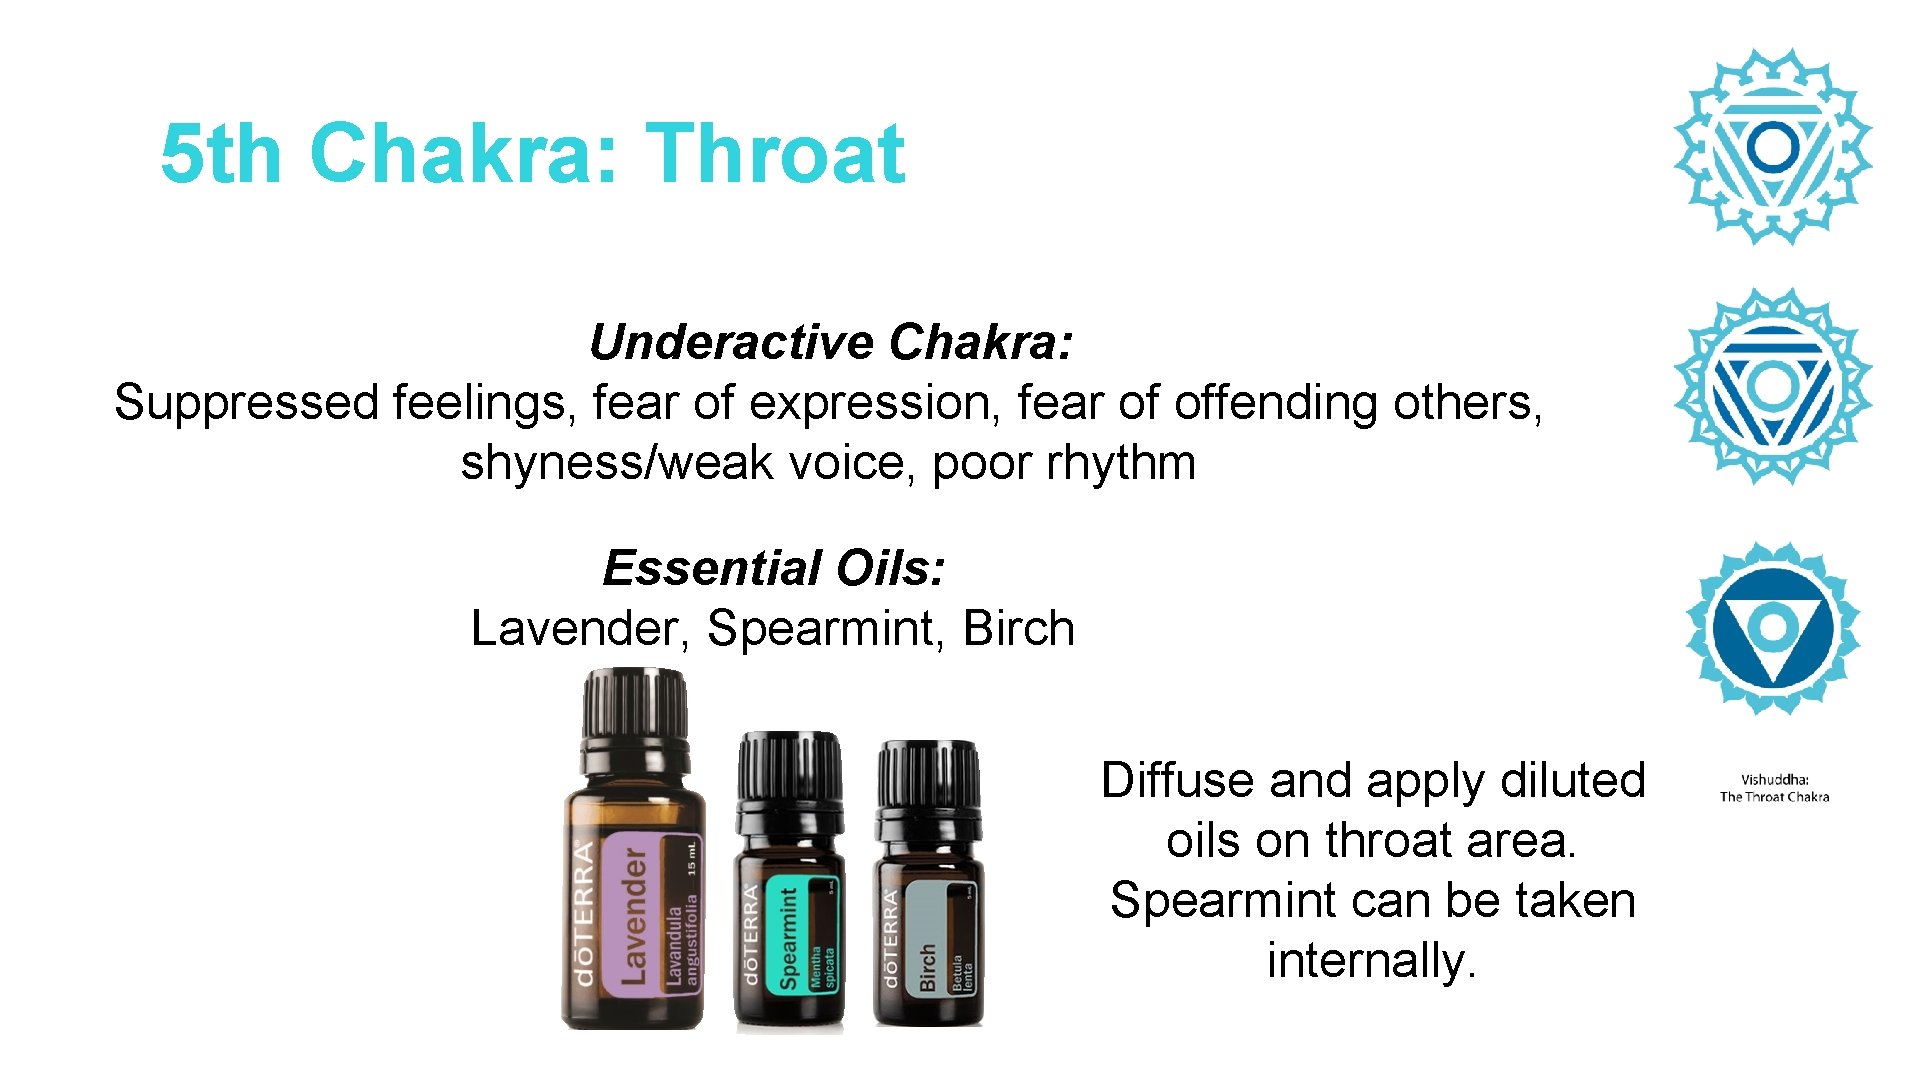 5 th Chakra: Throat Underactive Chakra: Suppressed feelings, fear of expression, fear of offending